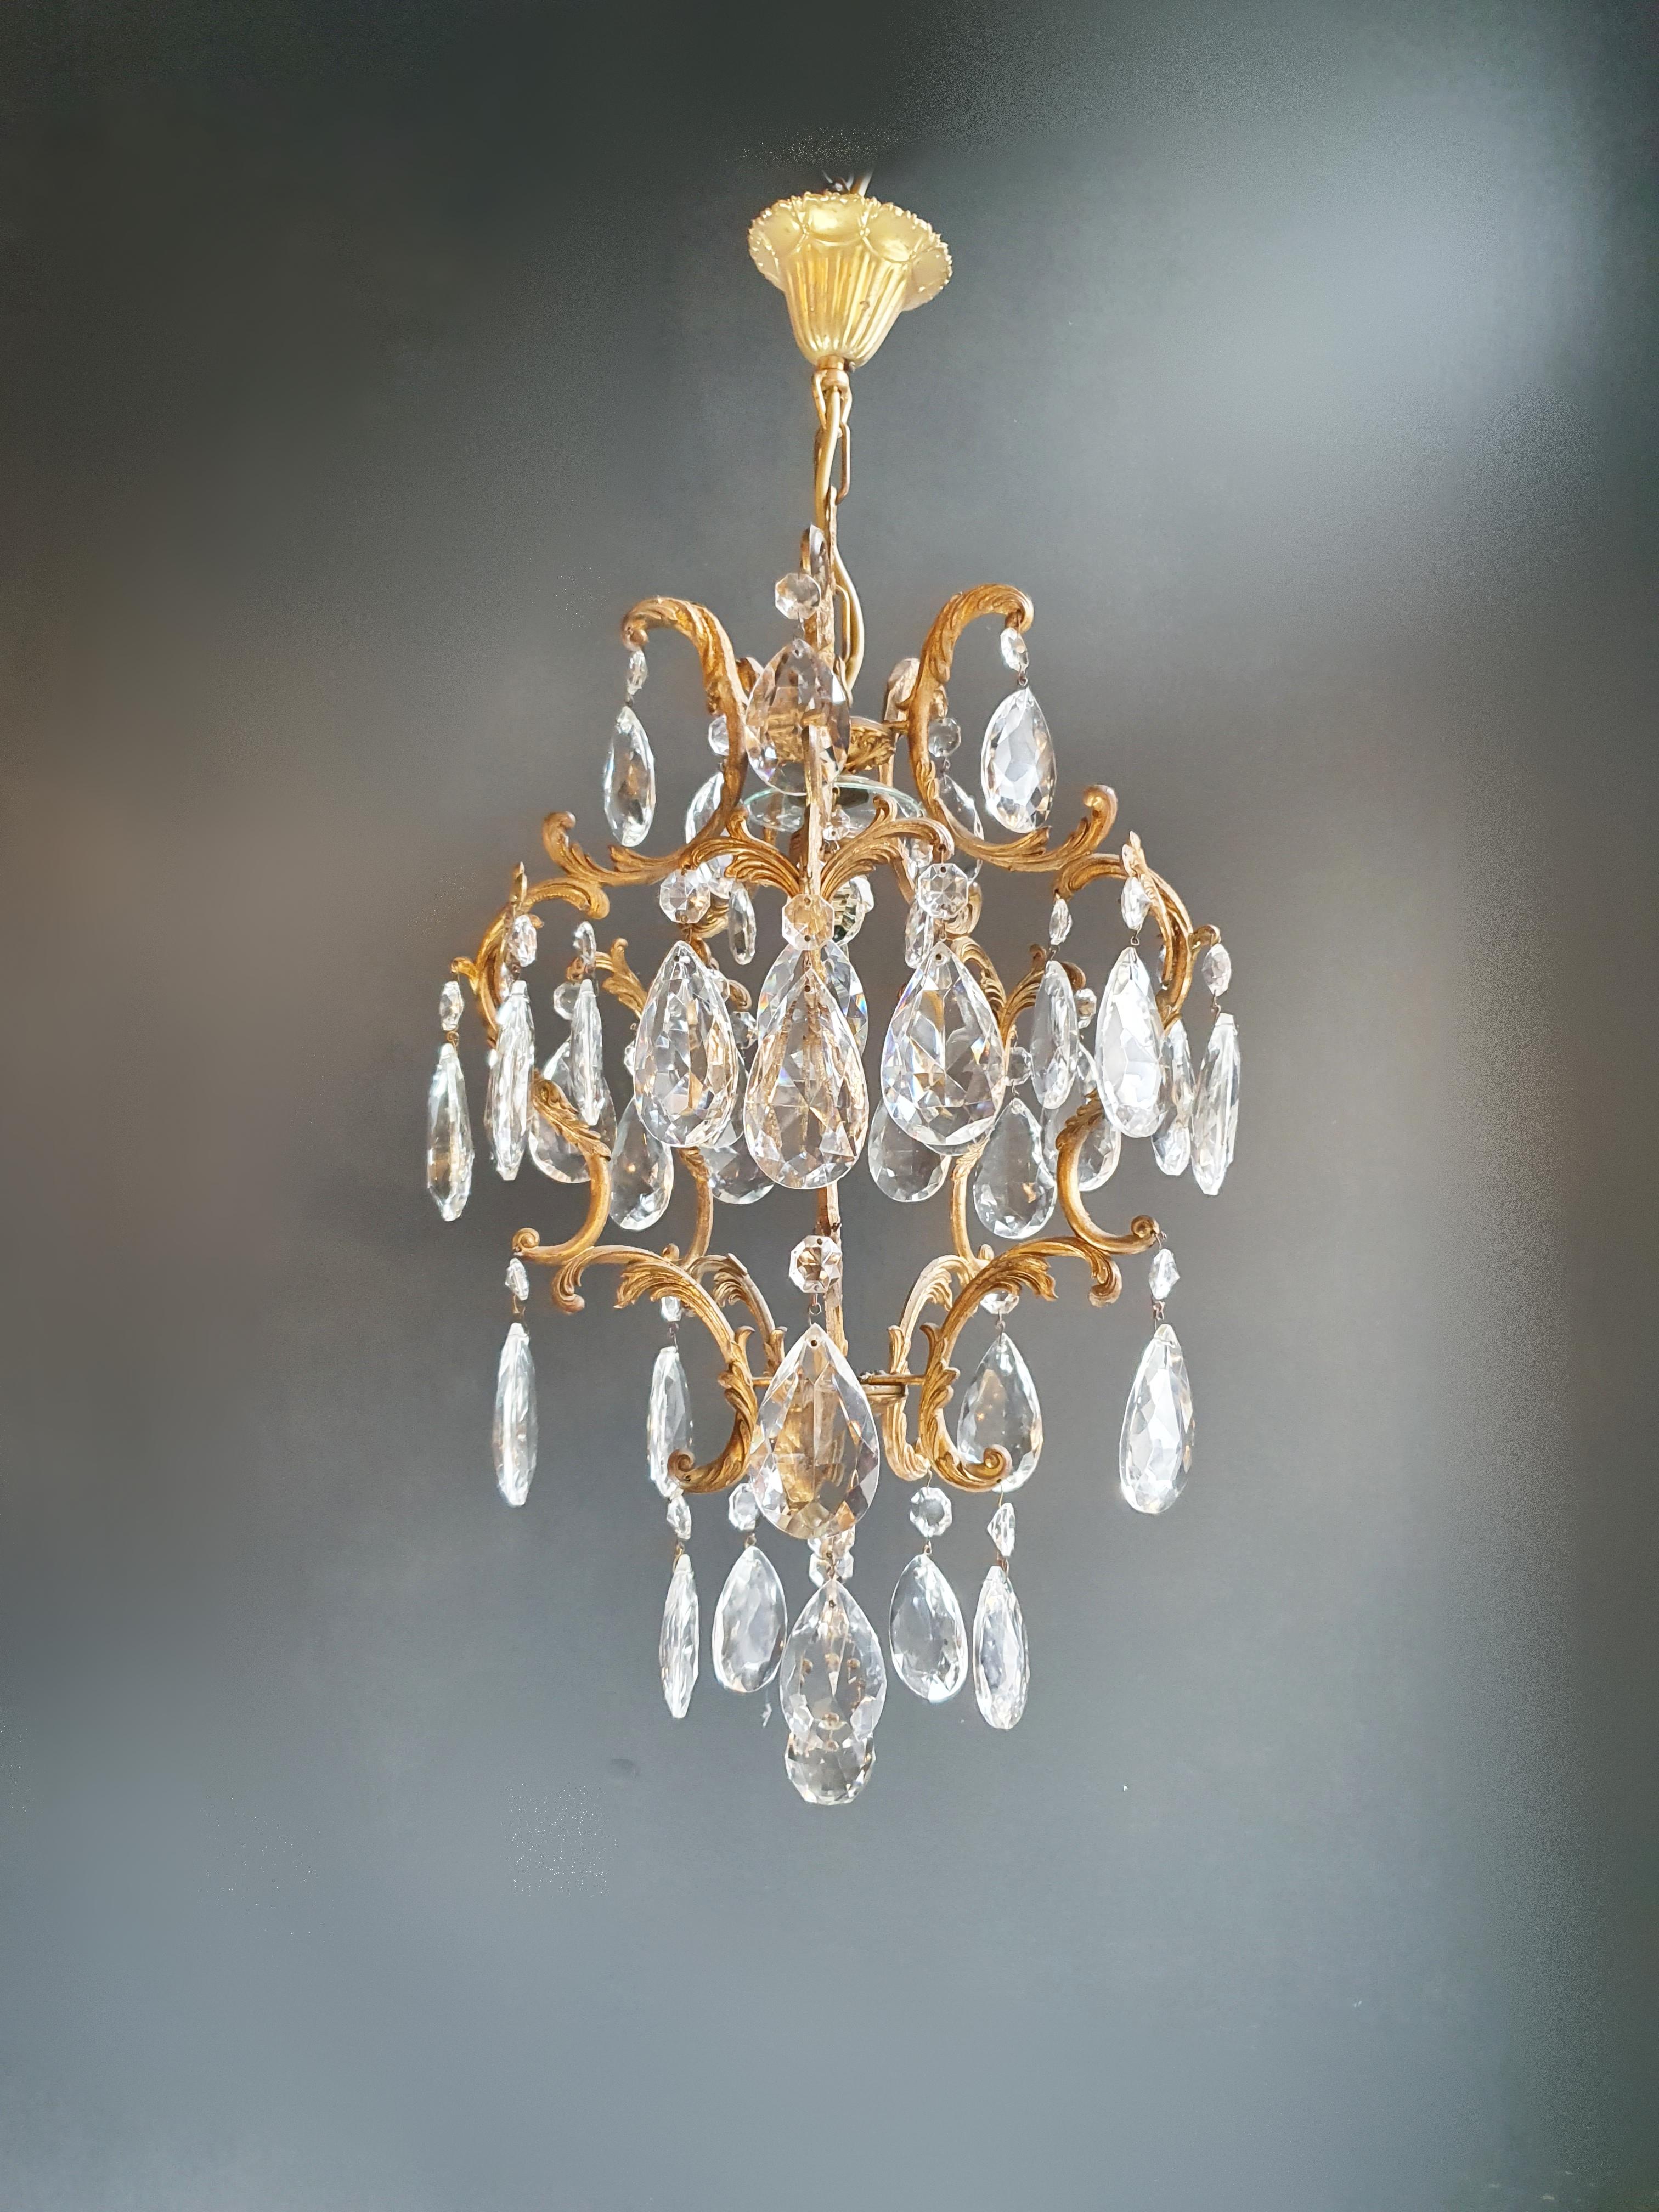 Original preserved chandelier, circa 1940. Cabling and sockets completely renewed. Crystal hand knotted
Measures: Total height: 70 cm, height without chain: 50 cm, diameter 32 cm, weight (approximately) 6 kg.

Number of lights: One-light bulb